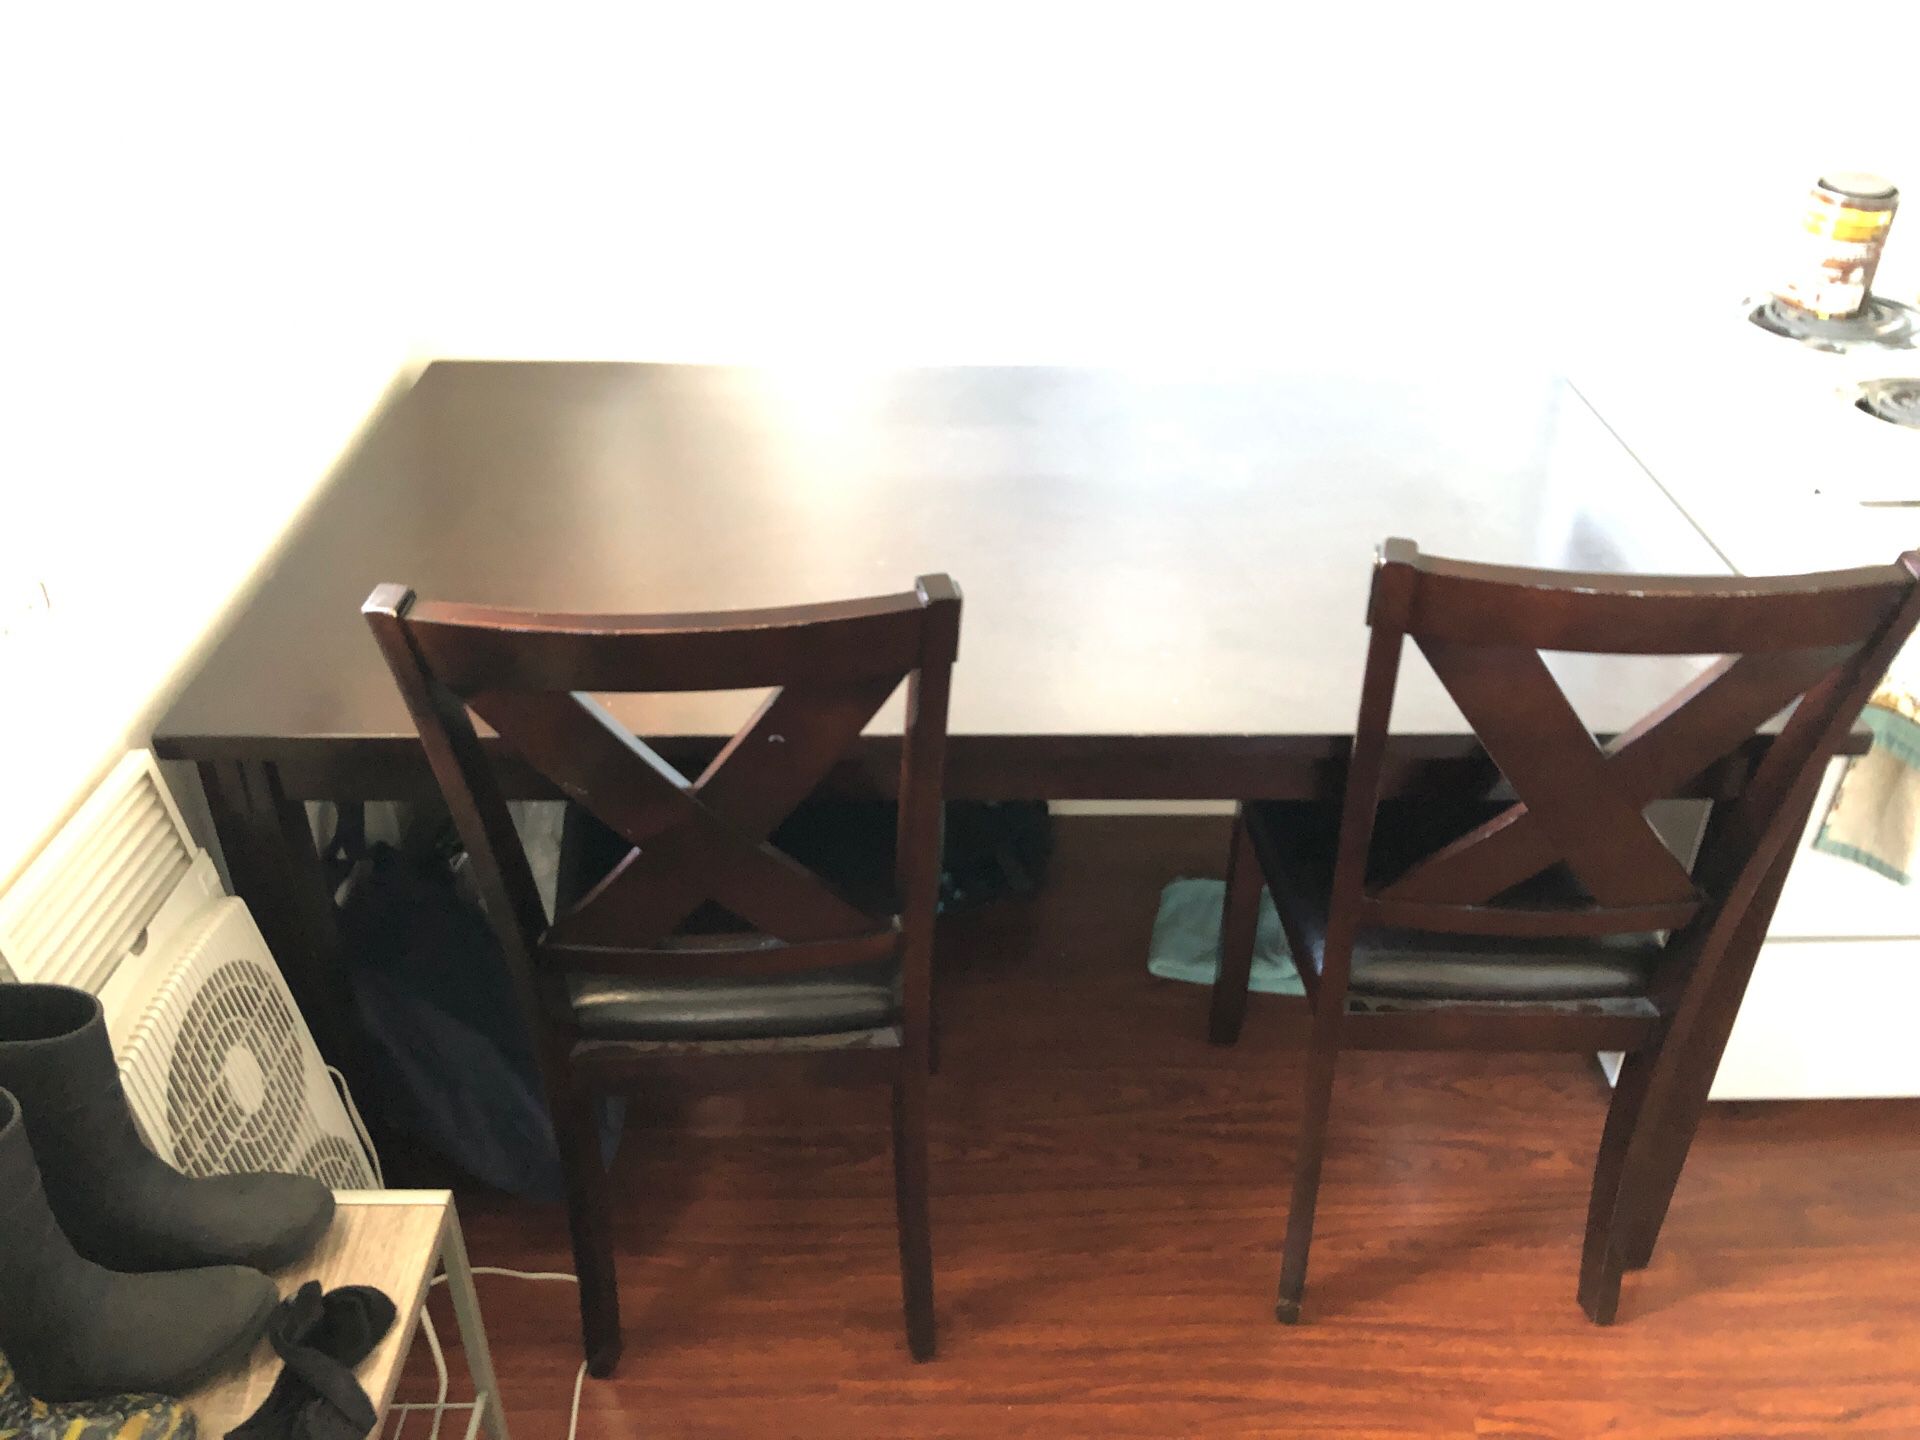 5' x 3' Dining table with 4 chairs and a bench seat - seats 6